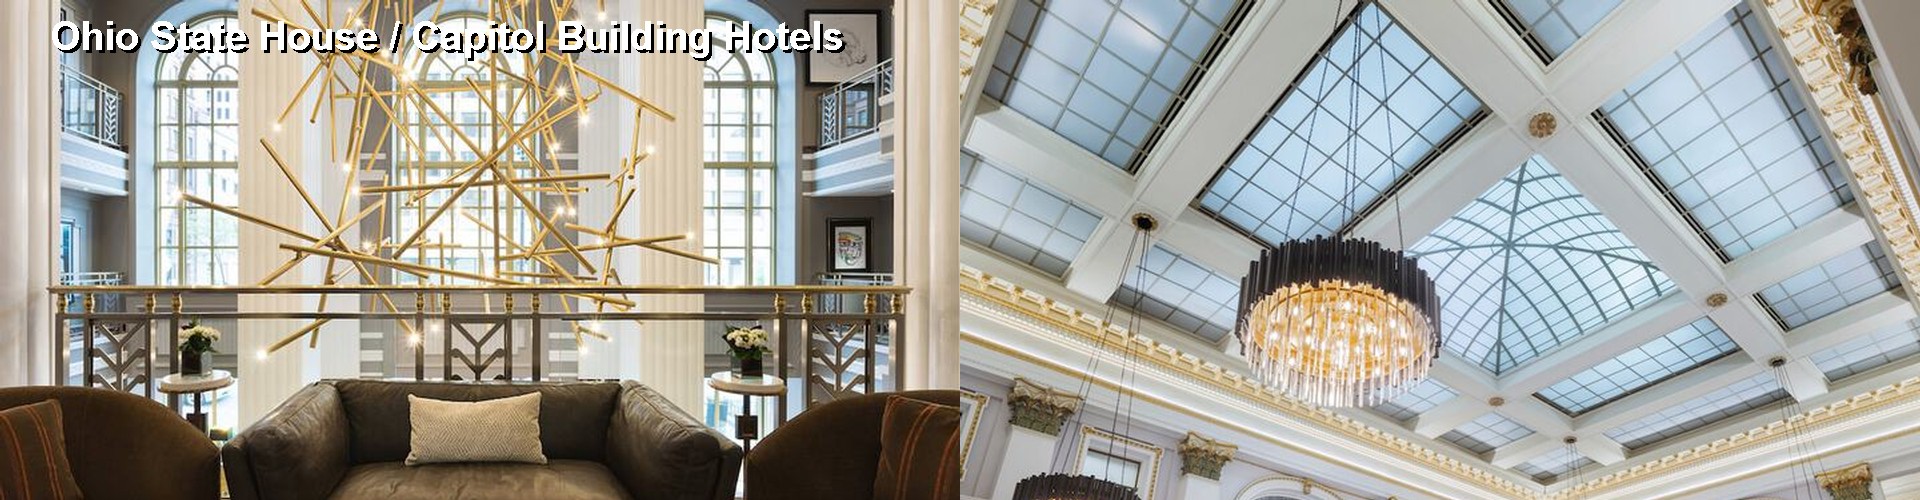 5 Best Hotels near Ohio State House / Capitol Building